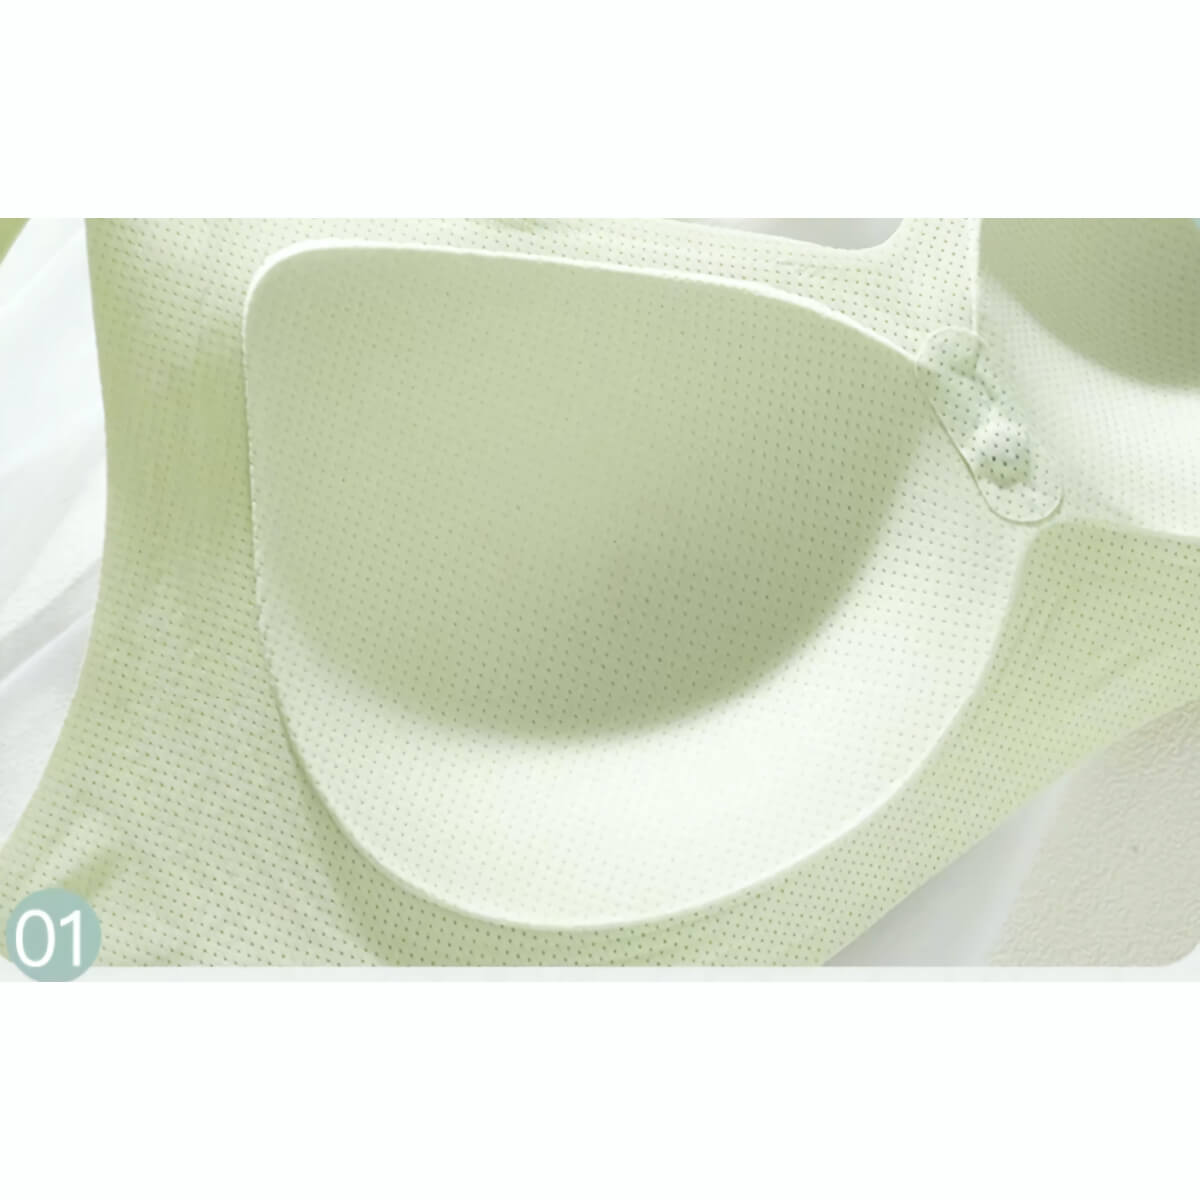 Supportive Full Coverage Seamless Bra for Large Breast